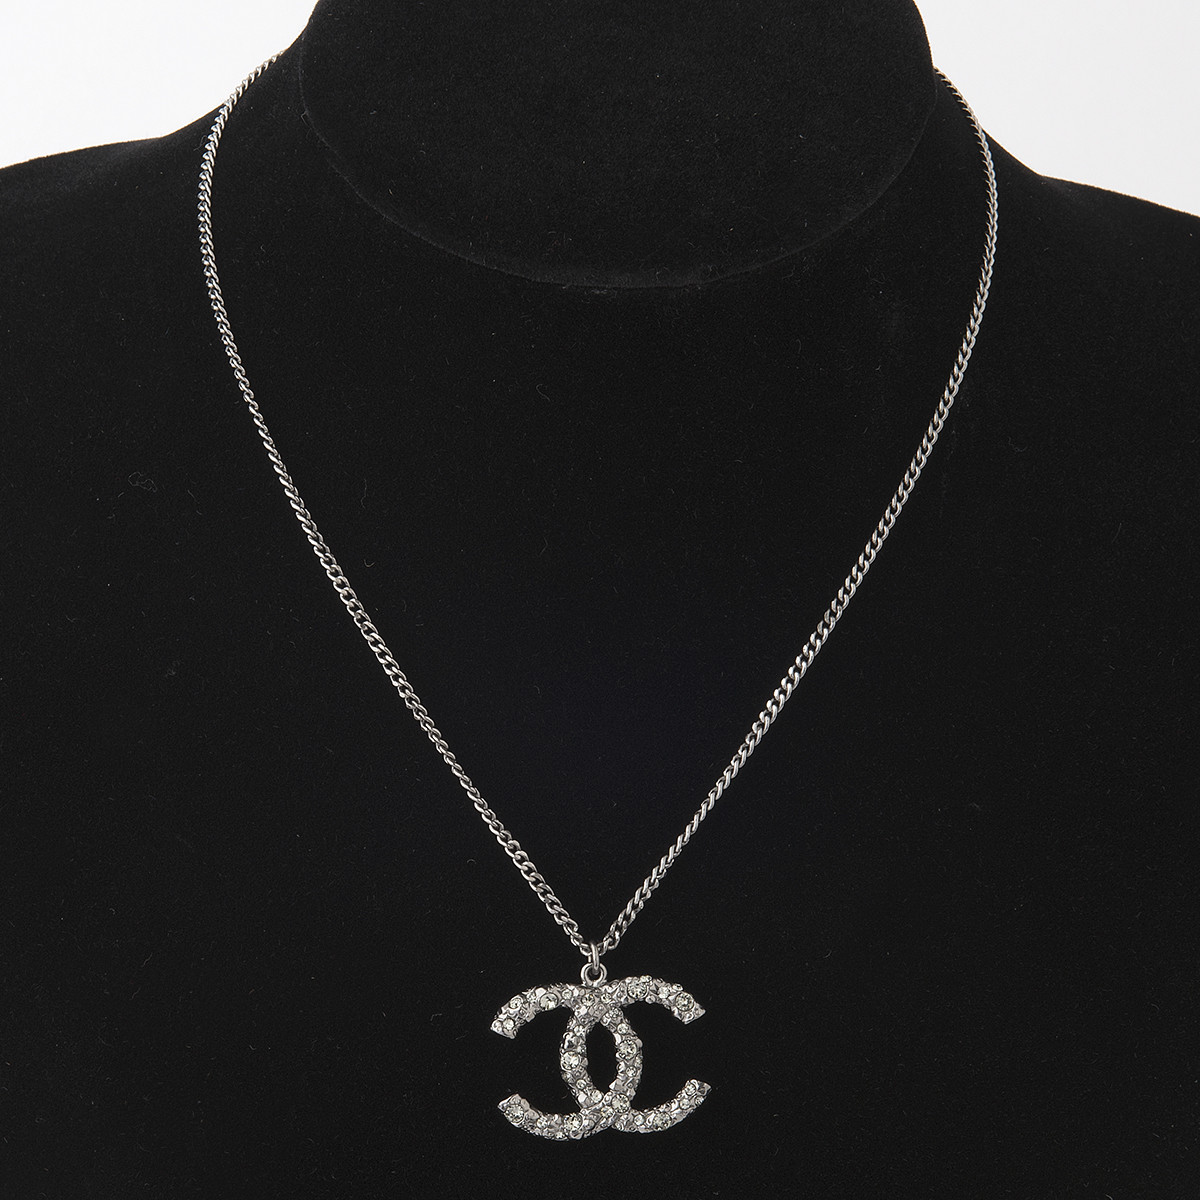 Chanel Pendant Necklace
 Preloved Chanel Necklace